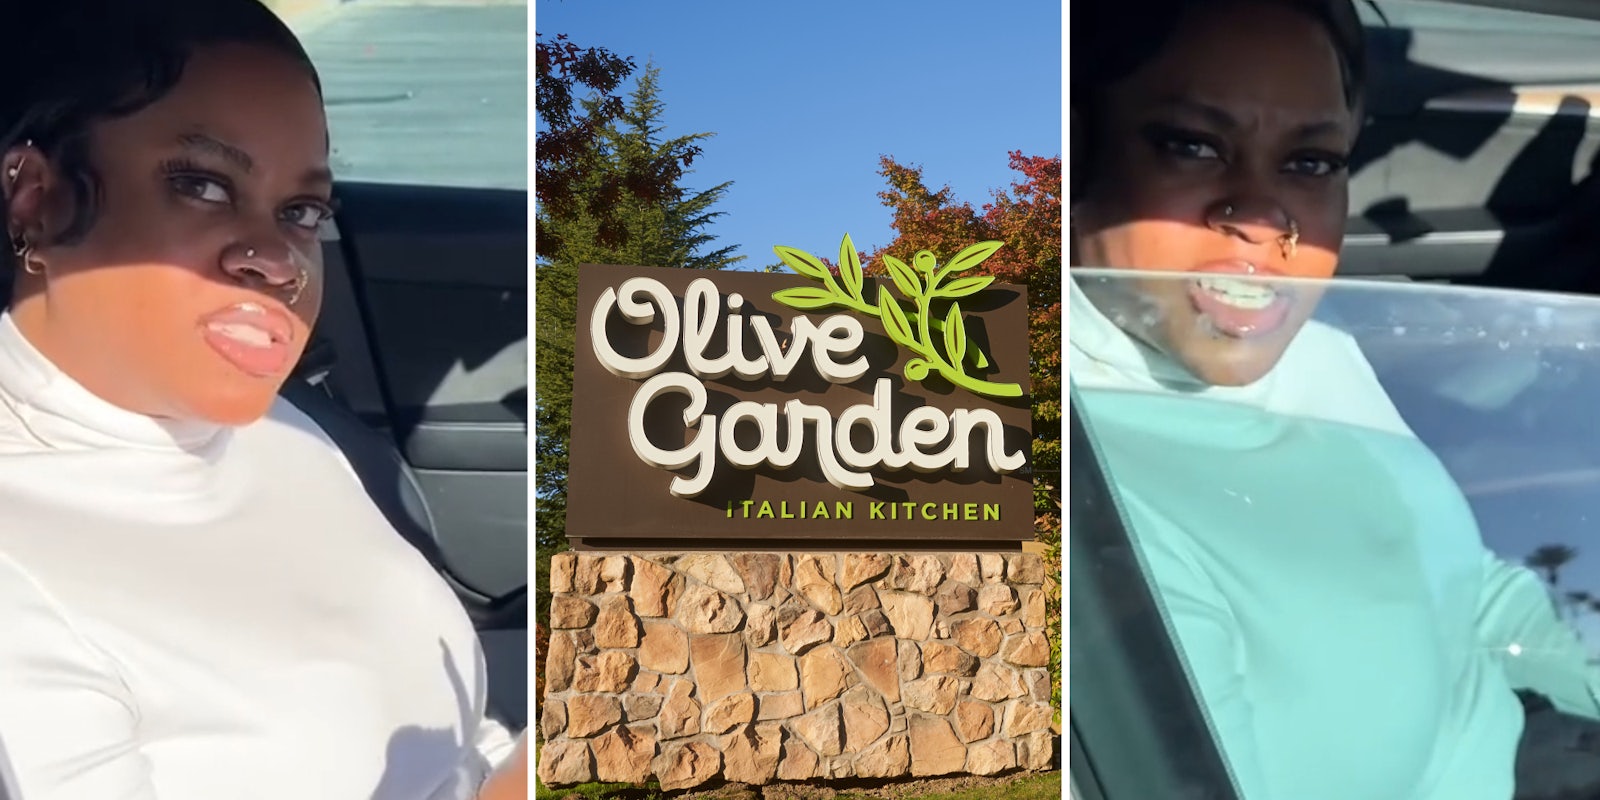 Woman refuses to get out of car after date takes her to Olive Garden.